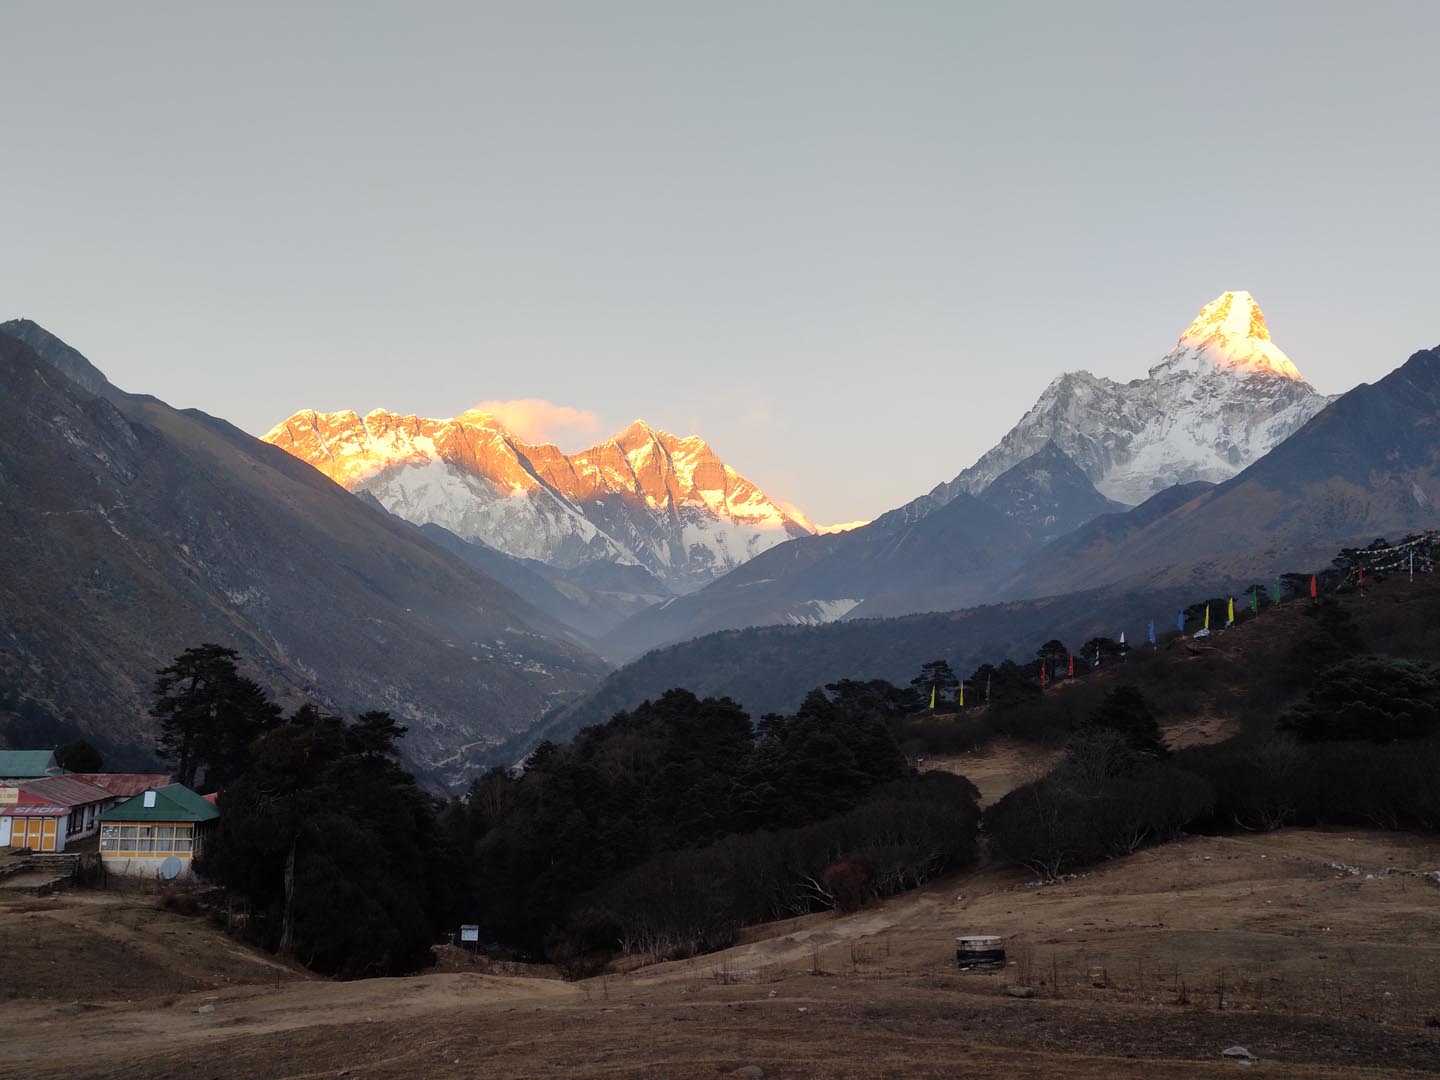 Morning rays on Mount Everest and Mount Lhotse as seen from Tengboche